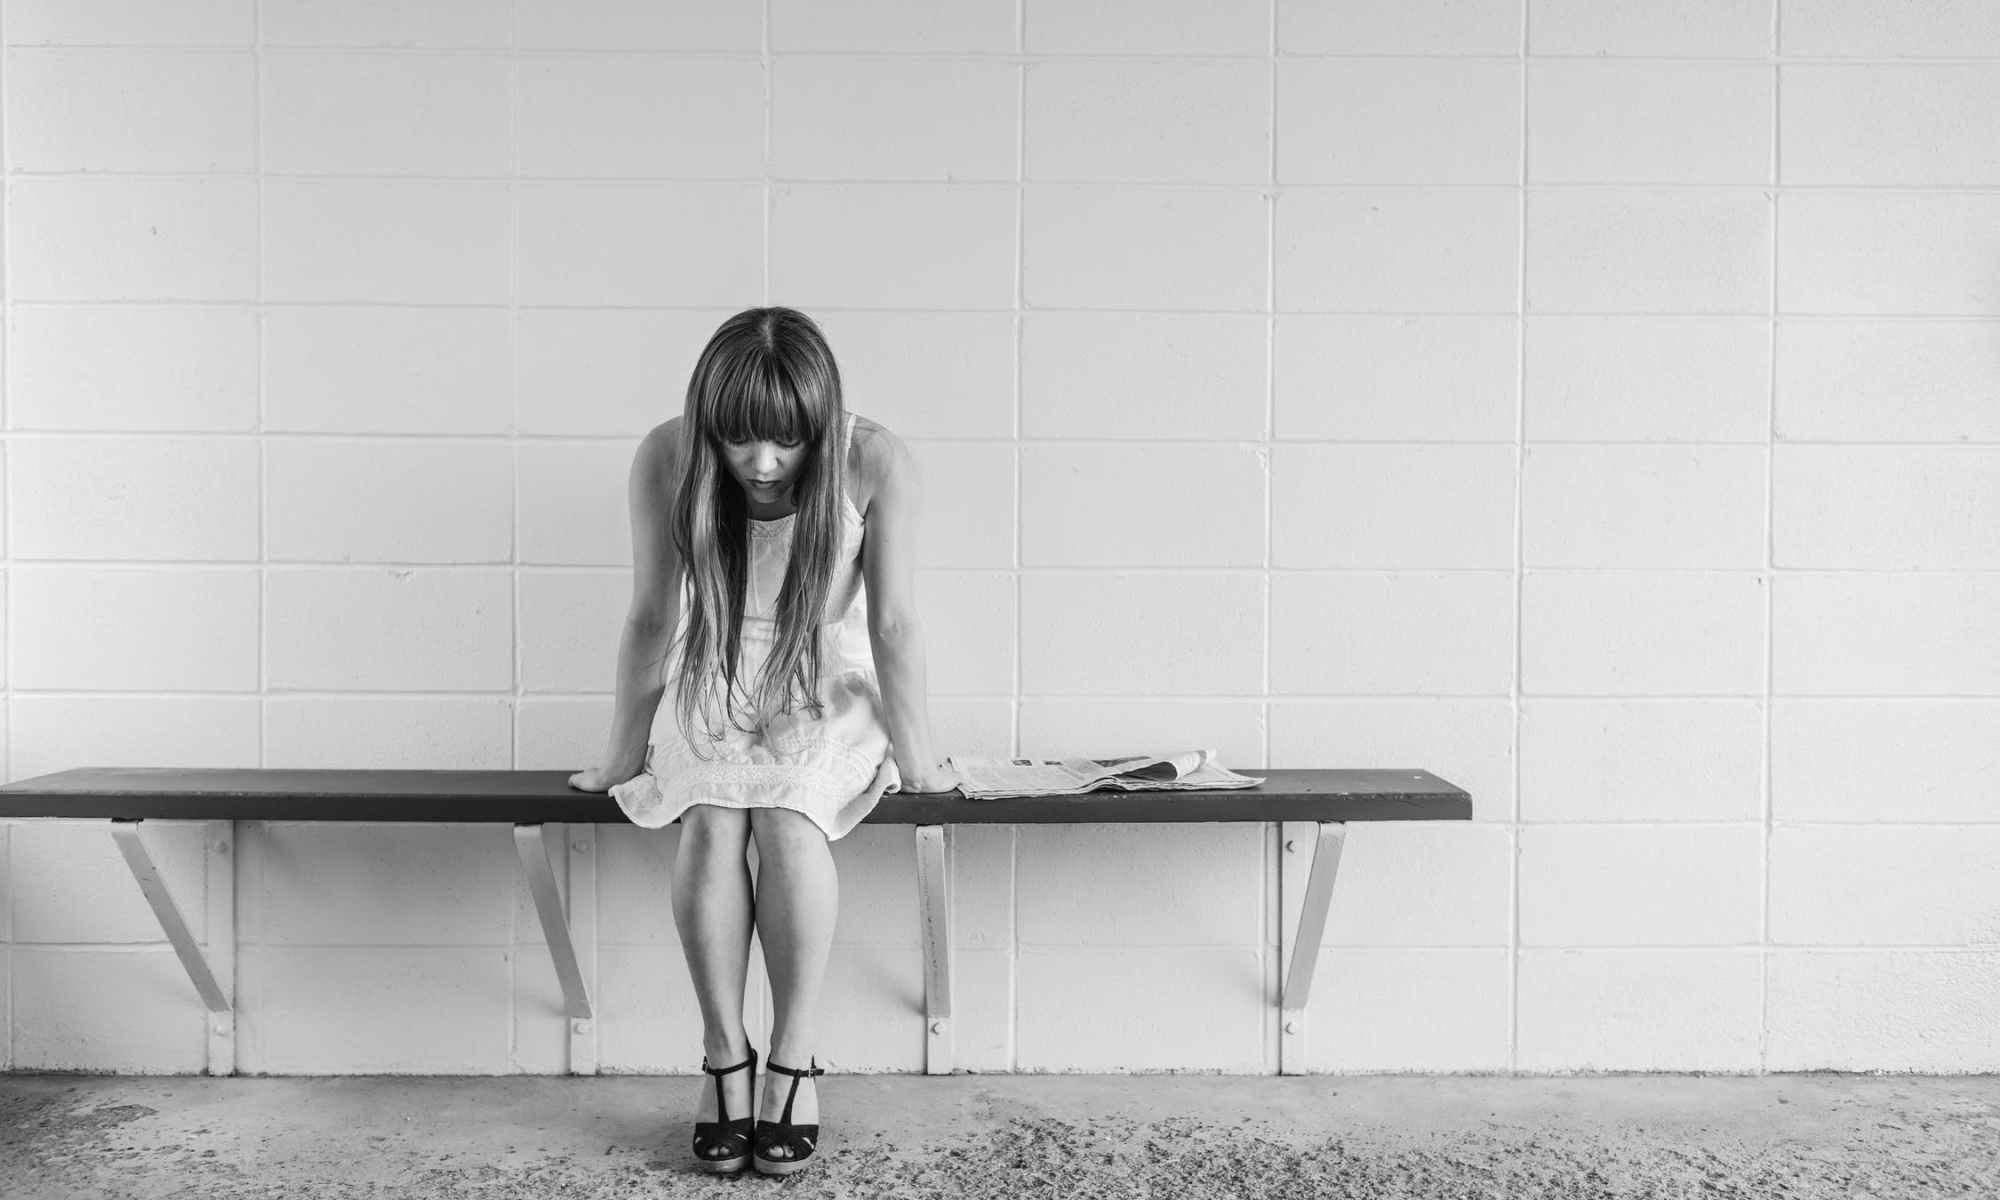 Grayscale photo of depressed woman sitting on bench against wall